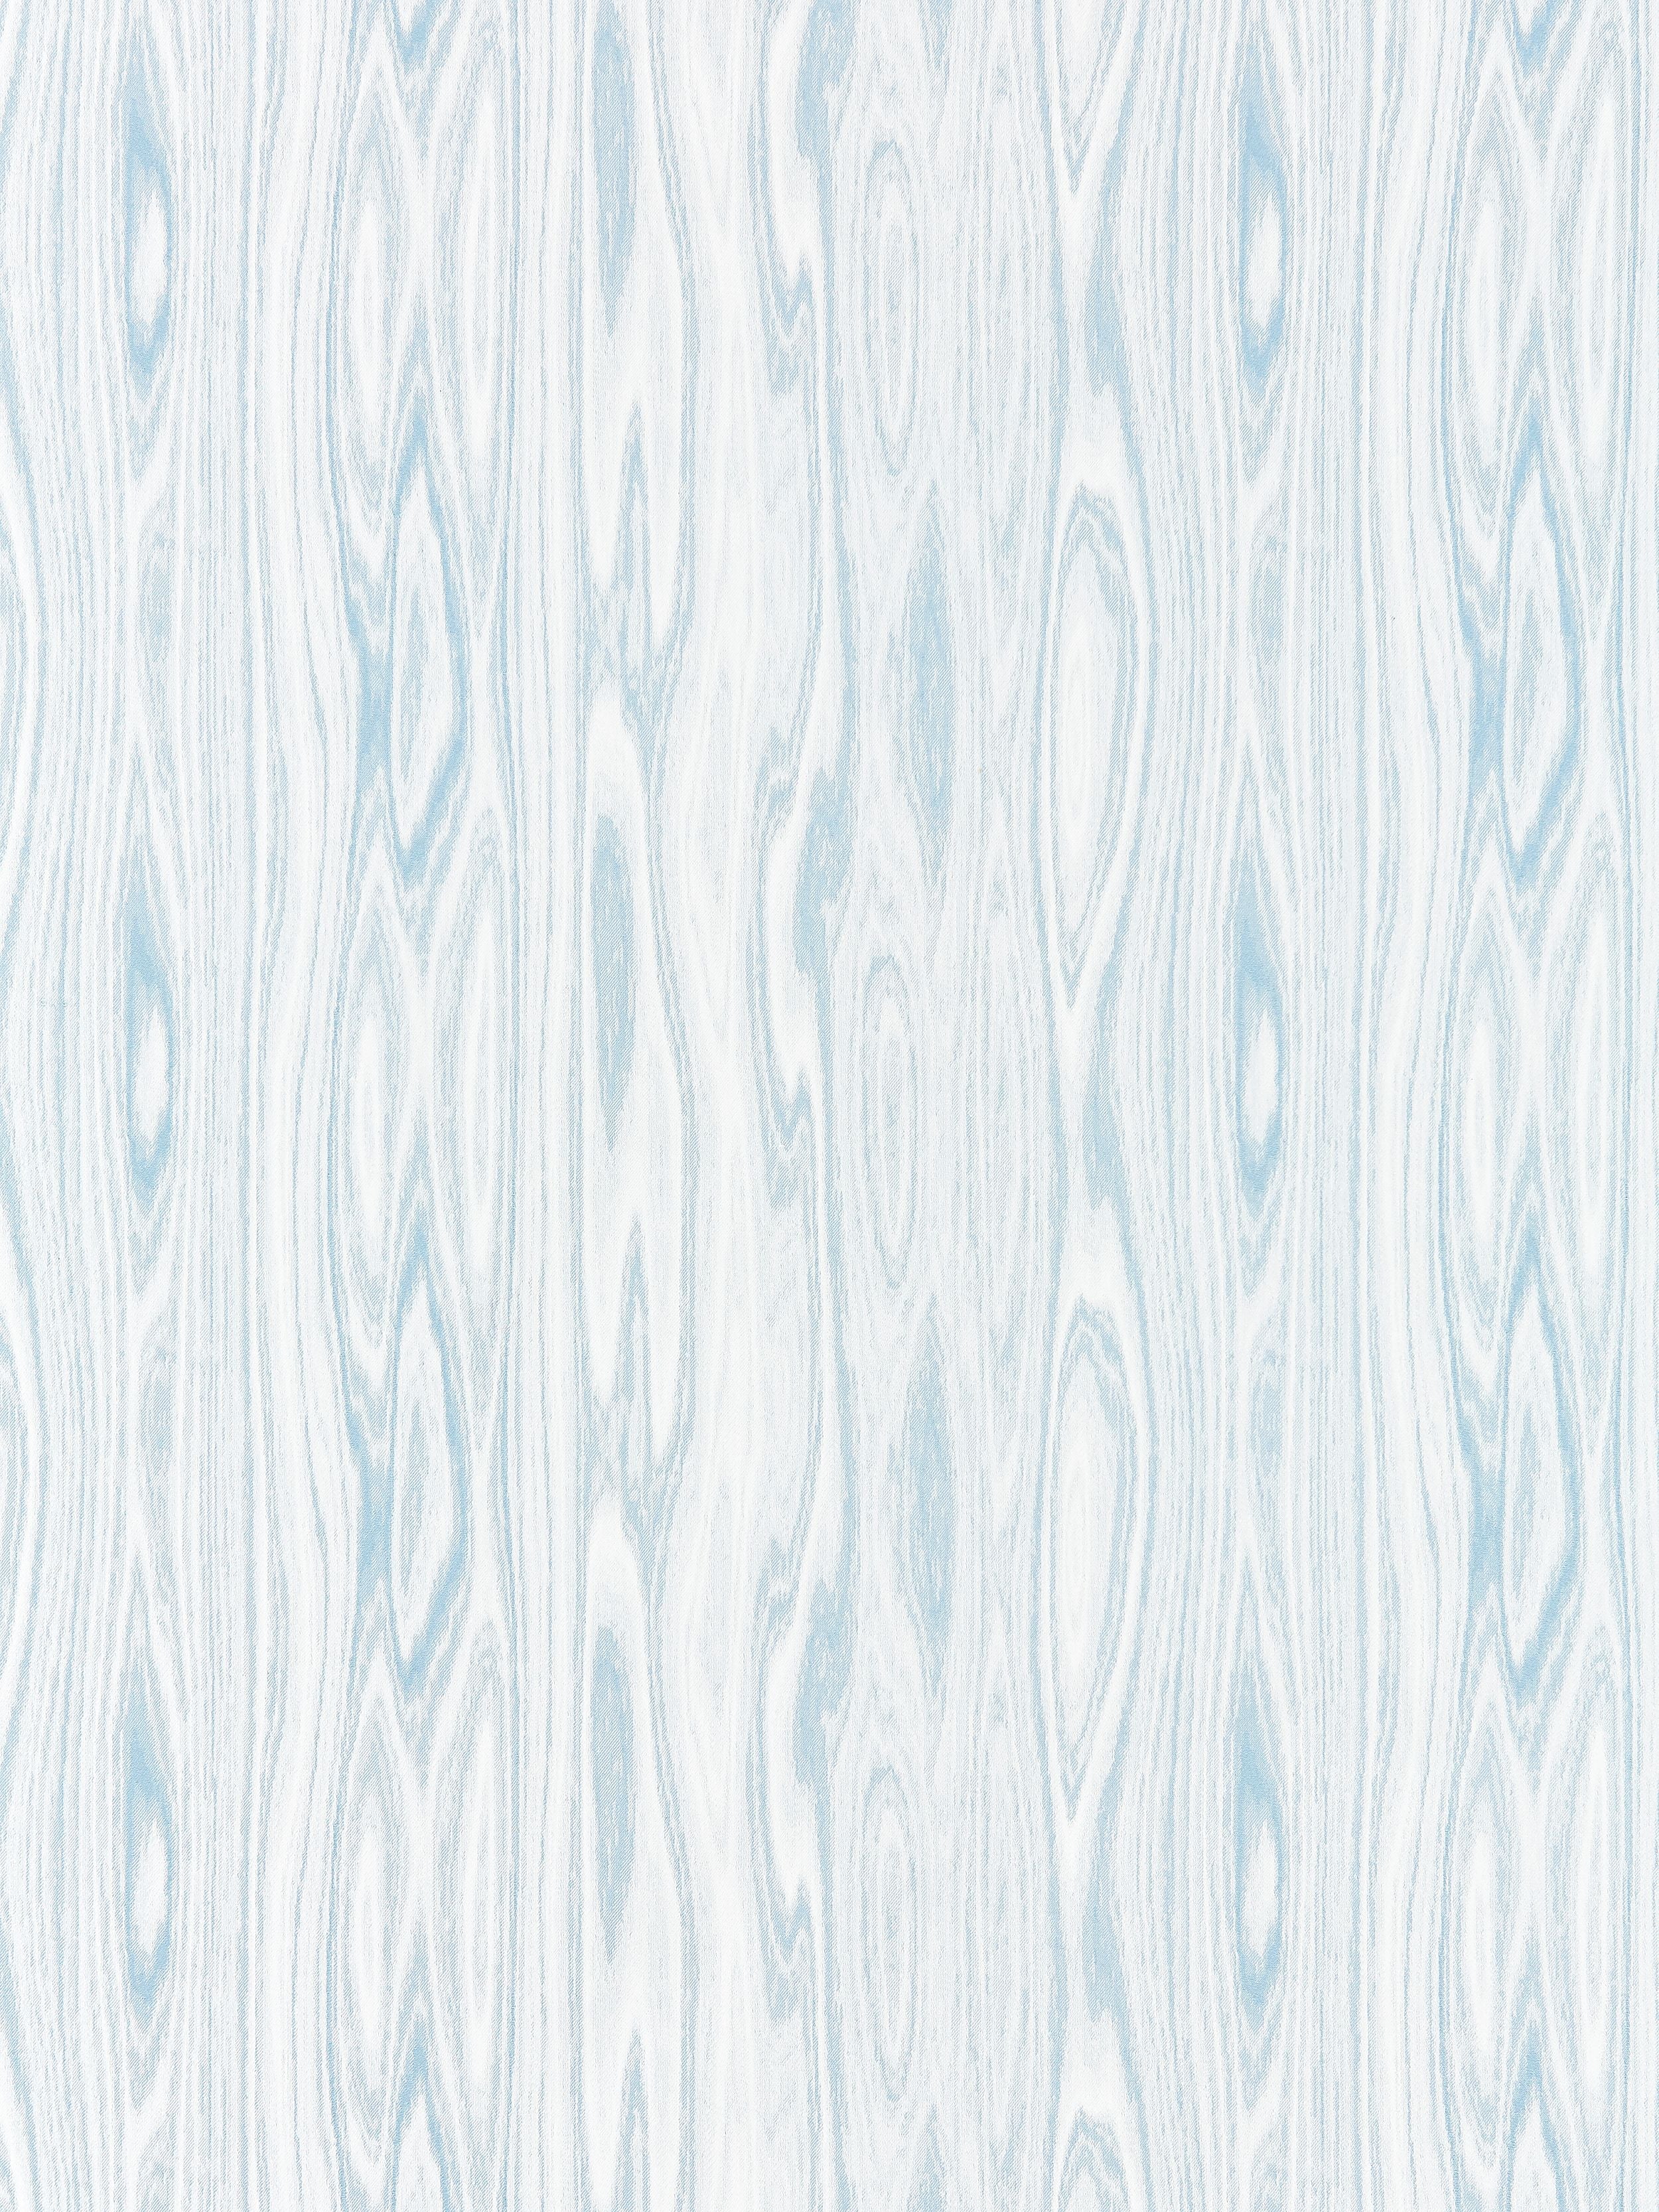 Faux Bois Weave fabric in blue ice color - pattern number SC 000327142 - by Scalamandre in the Scalamandre Fabrics Book 1 collection